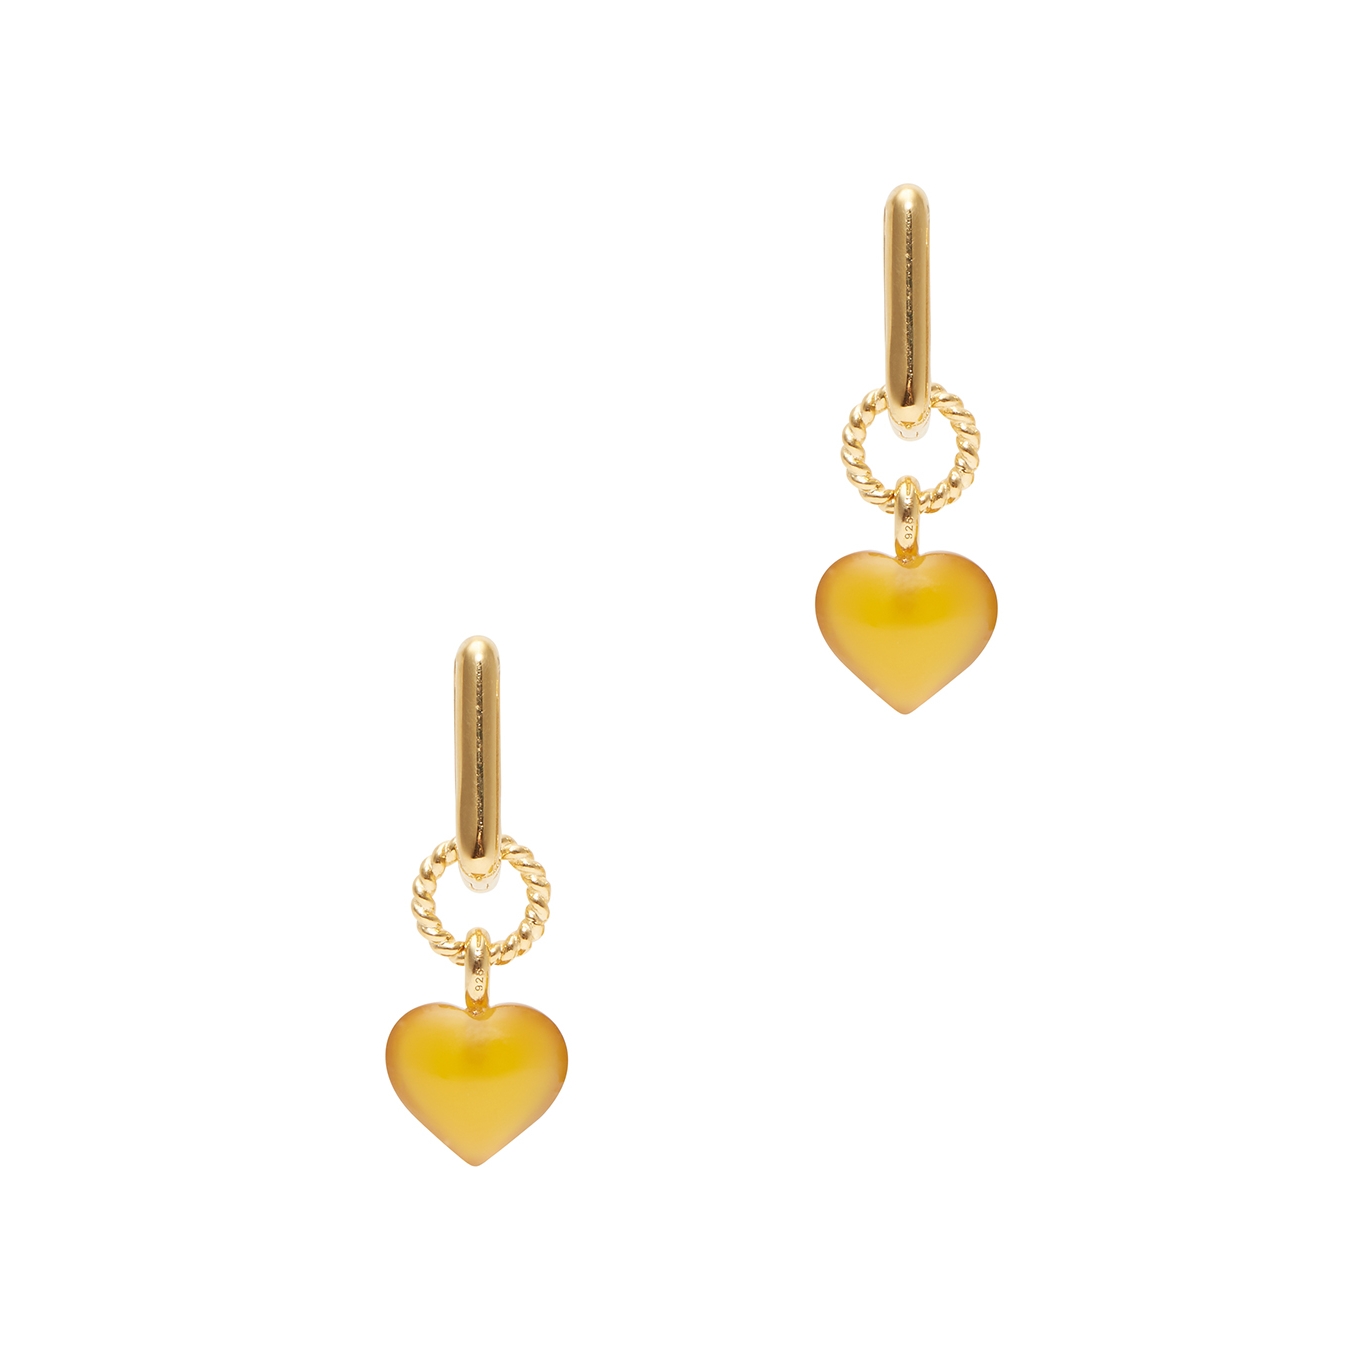 Missoma Heart 18kt Gold-plated Earrings - Yellow - One Size